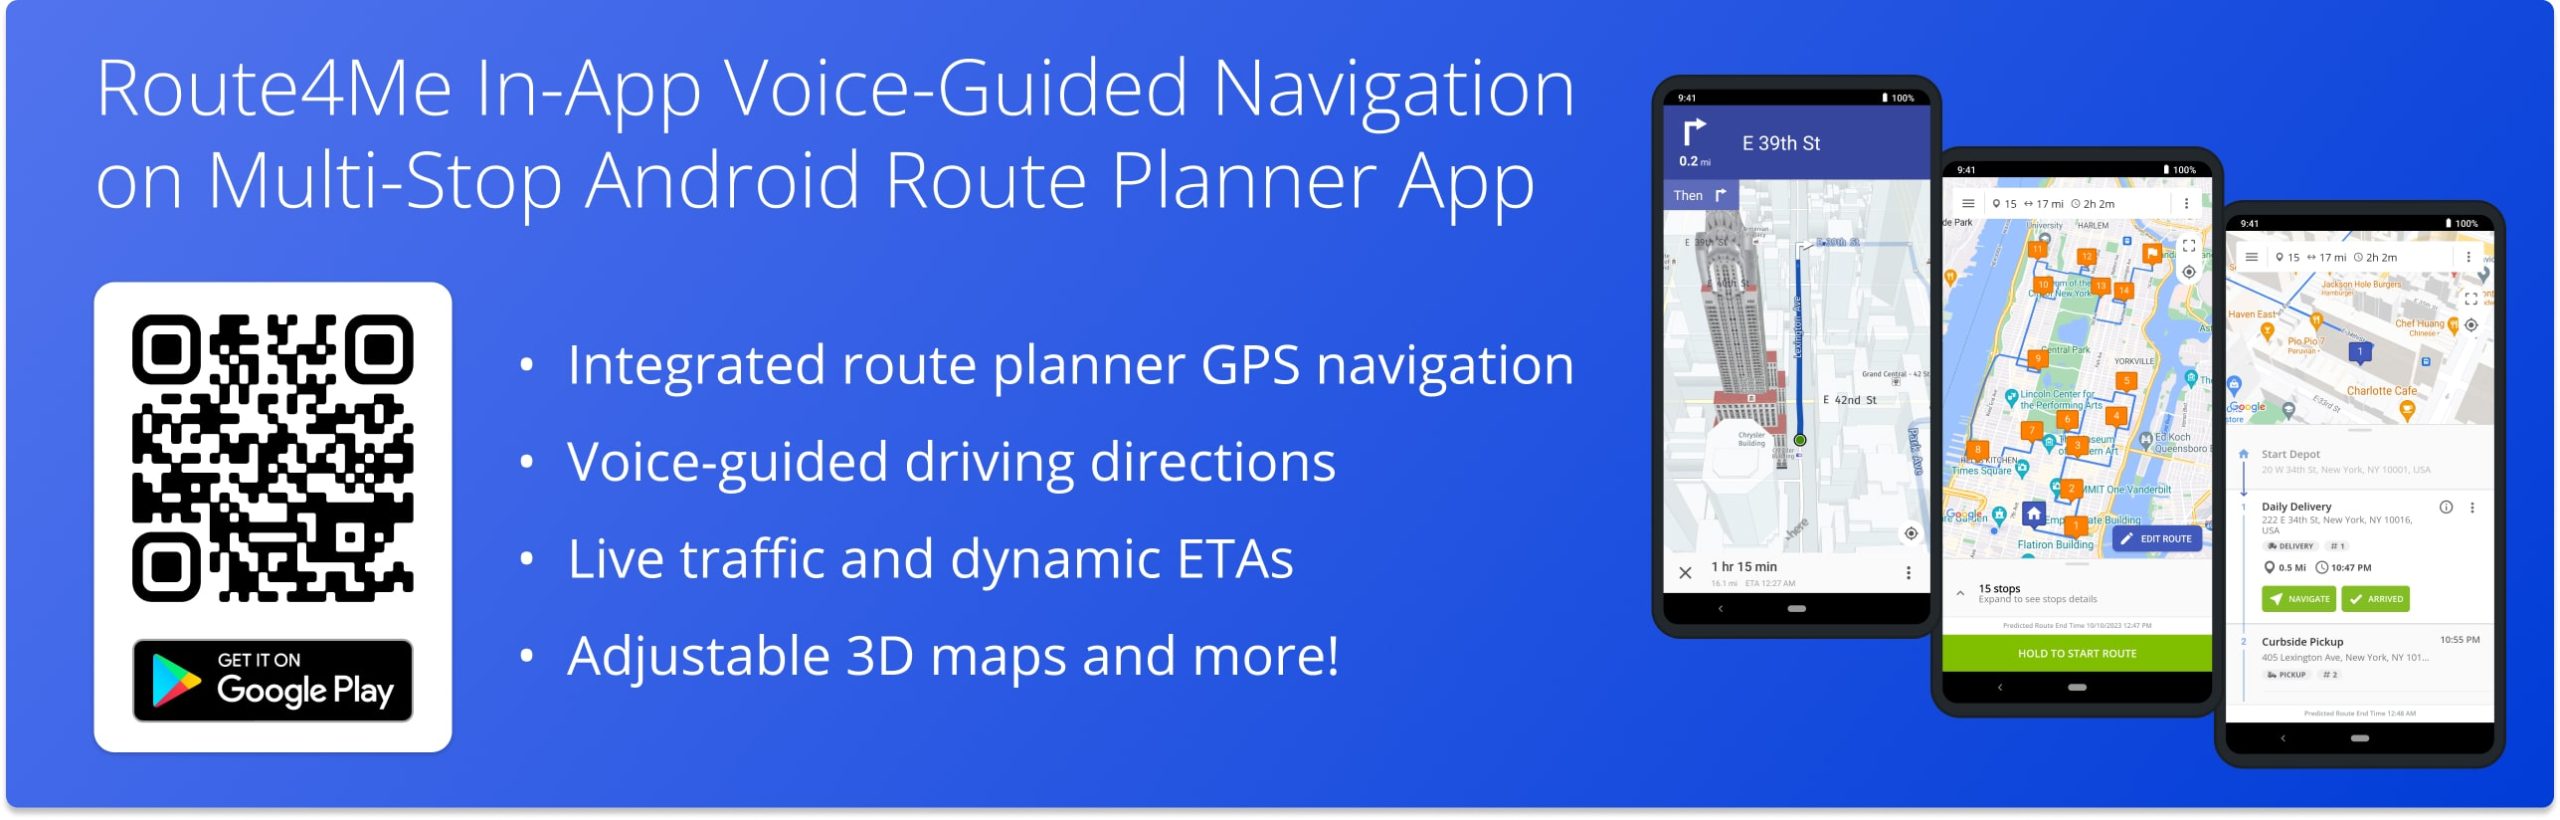 Route4Me's Android route planner in-app integrated voice-guided navigation with live traffic and adjustable maps.